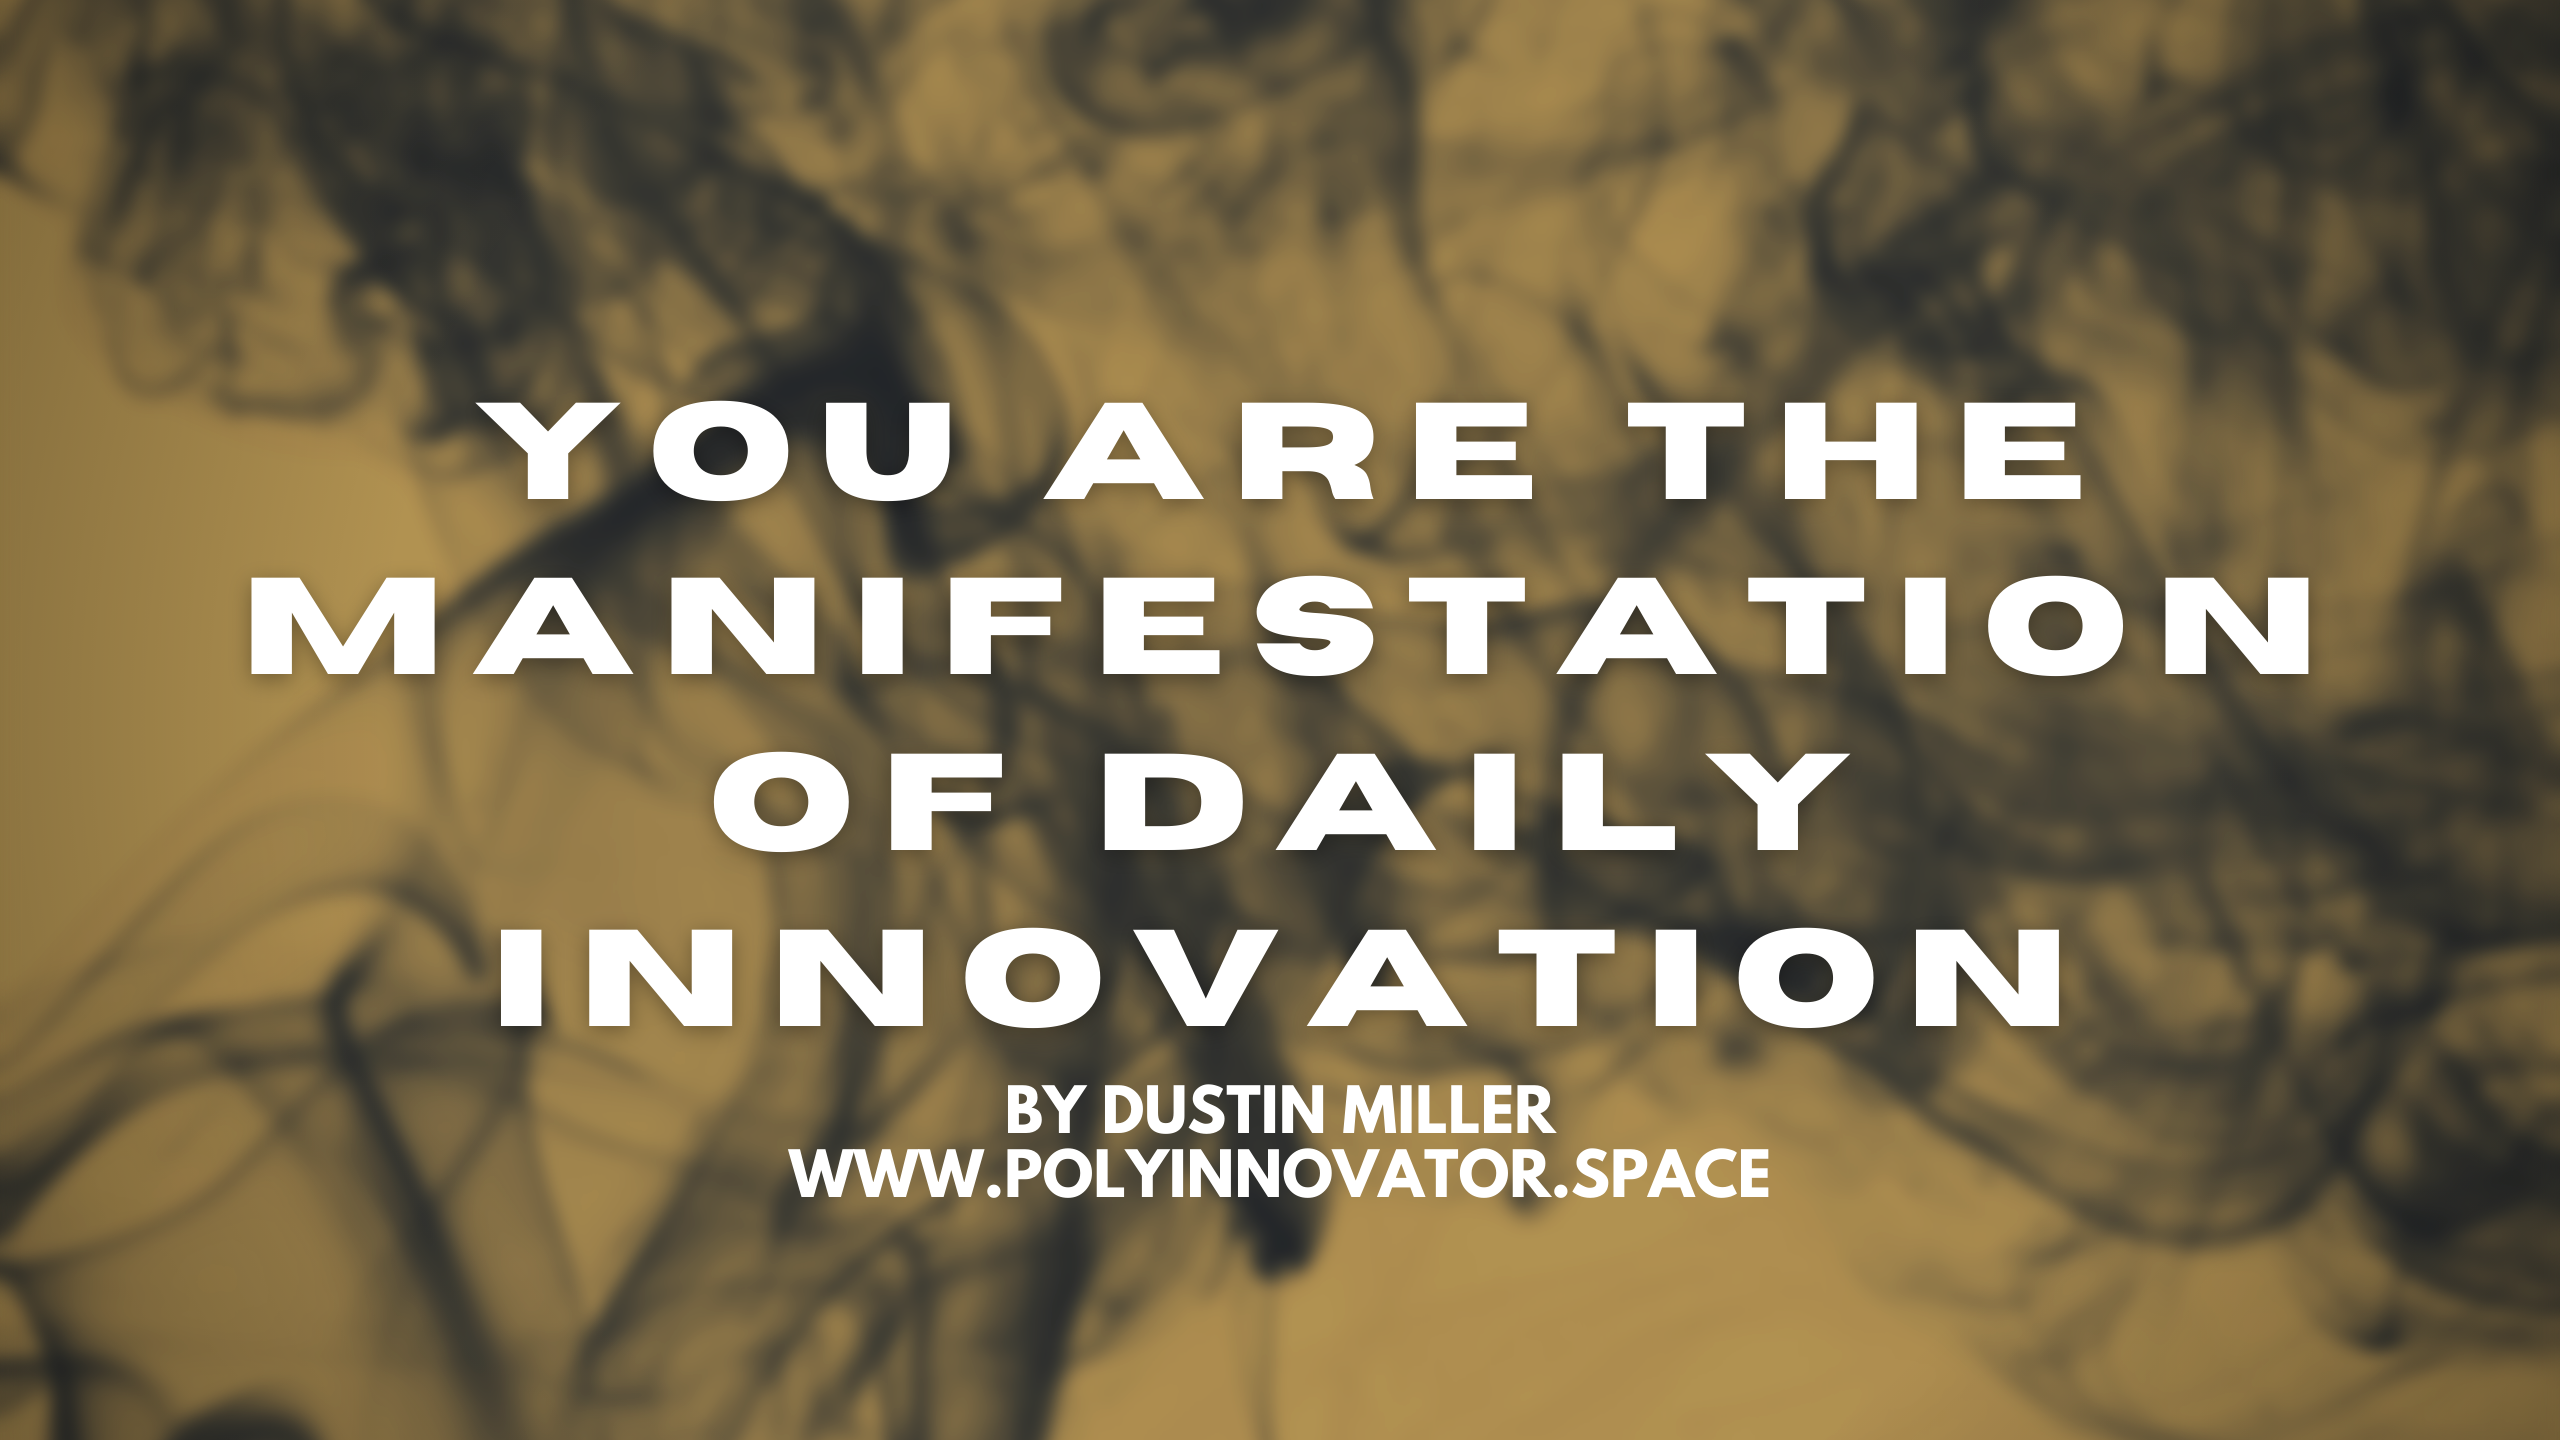 You Are the Manifestation of Daily Innovation